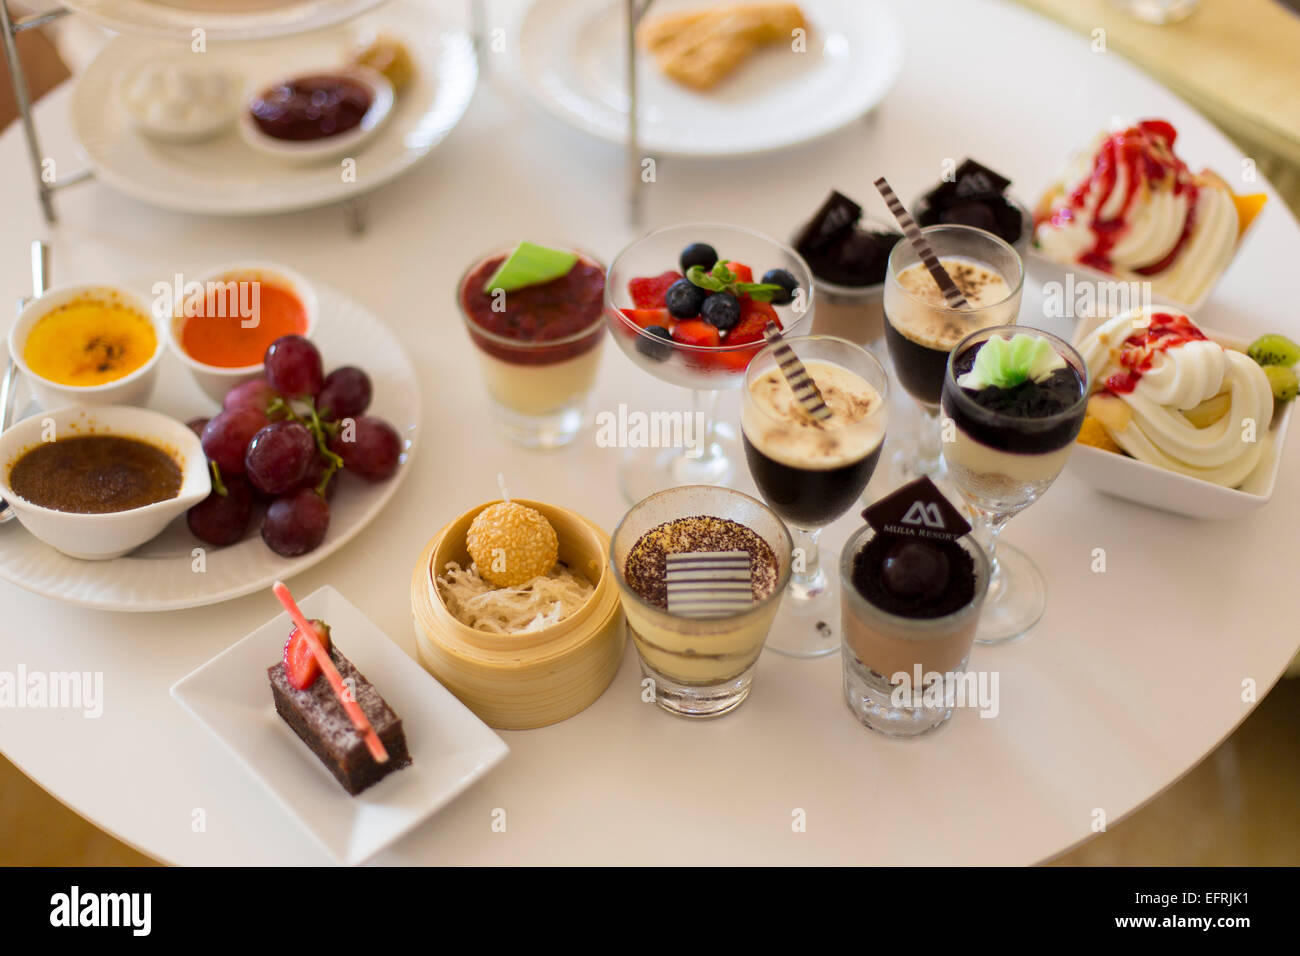 Desserts on a plate Stock Photo